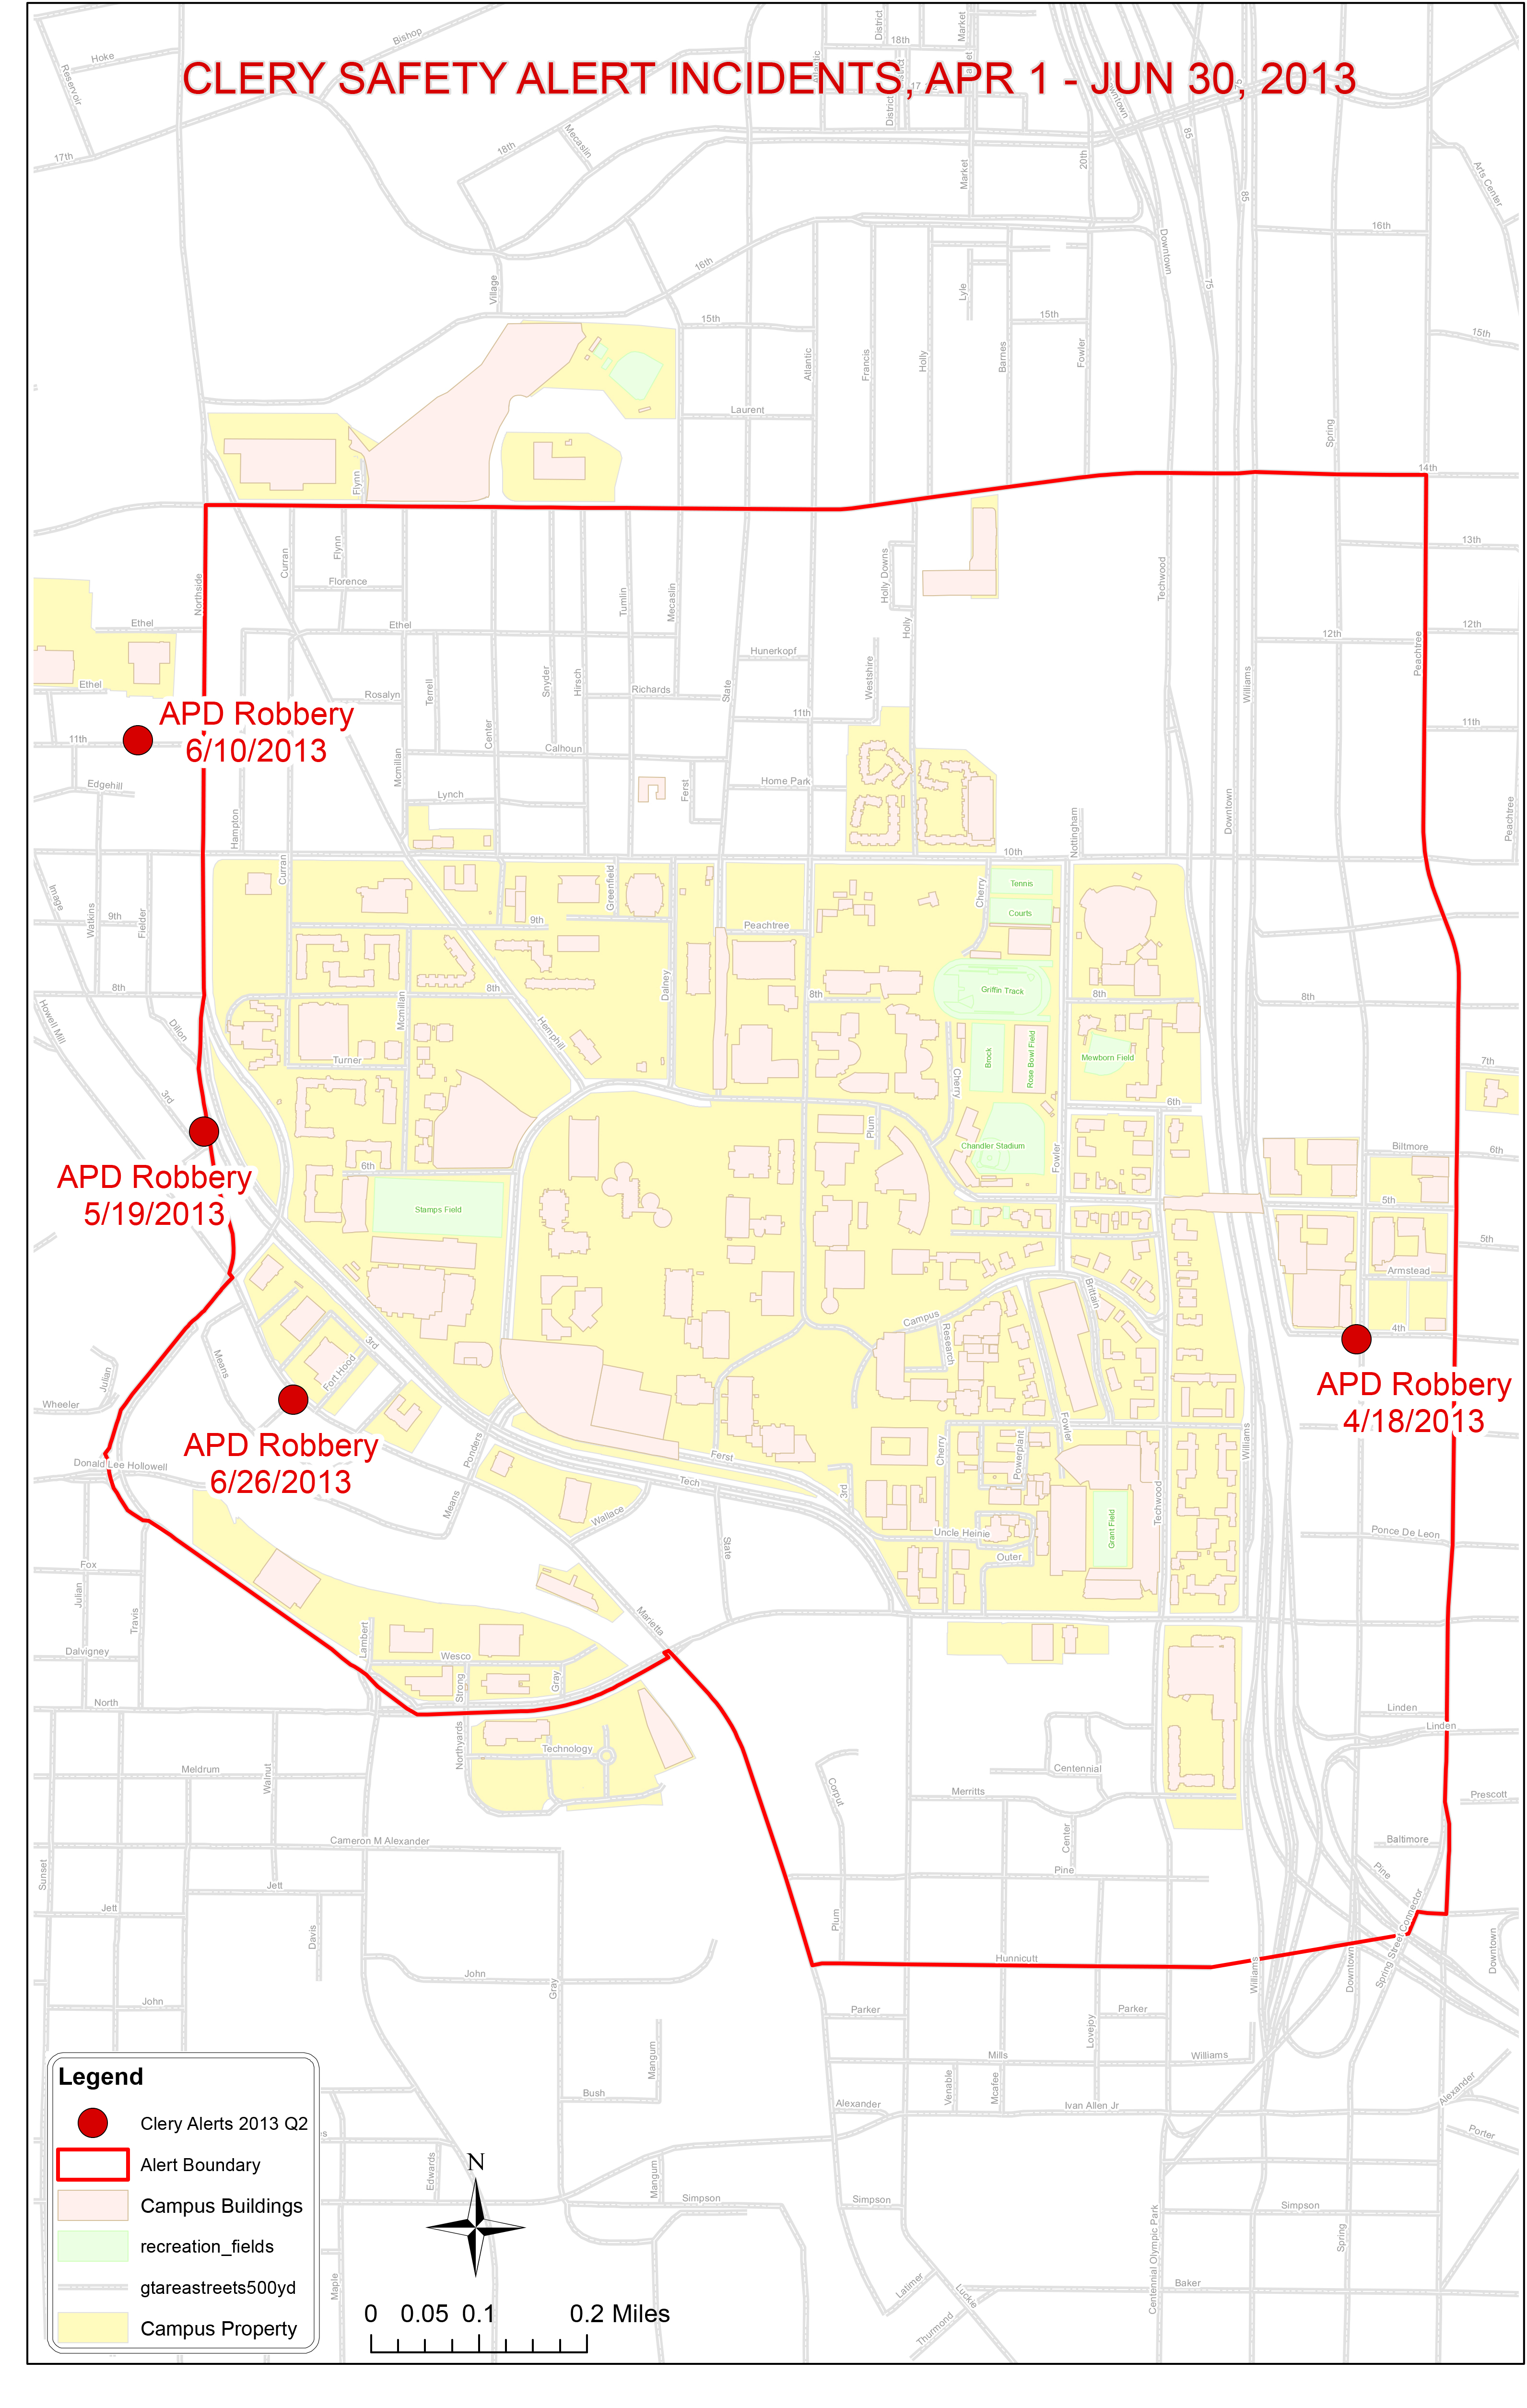 Knowledge is power when it comes to not being a victim of a crime. This map shows where crimes that merited a Clery Alert (distributed to warn about crimes that represent threats to the campus community) occurred between April 1 and June 30.